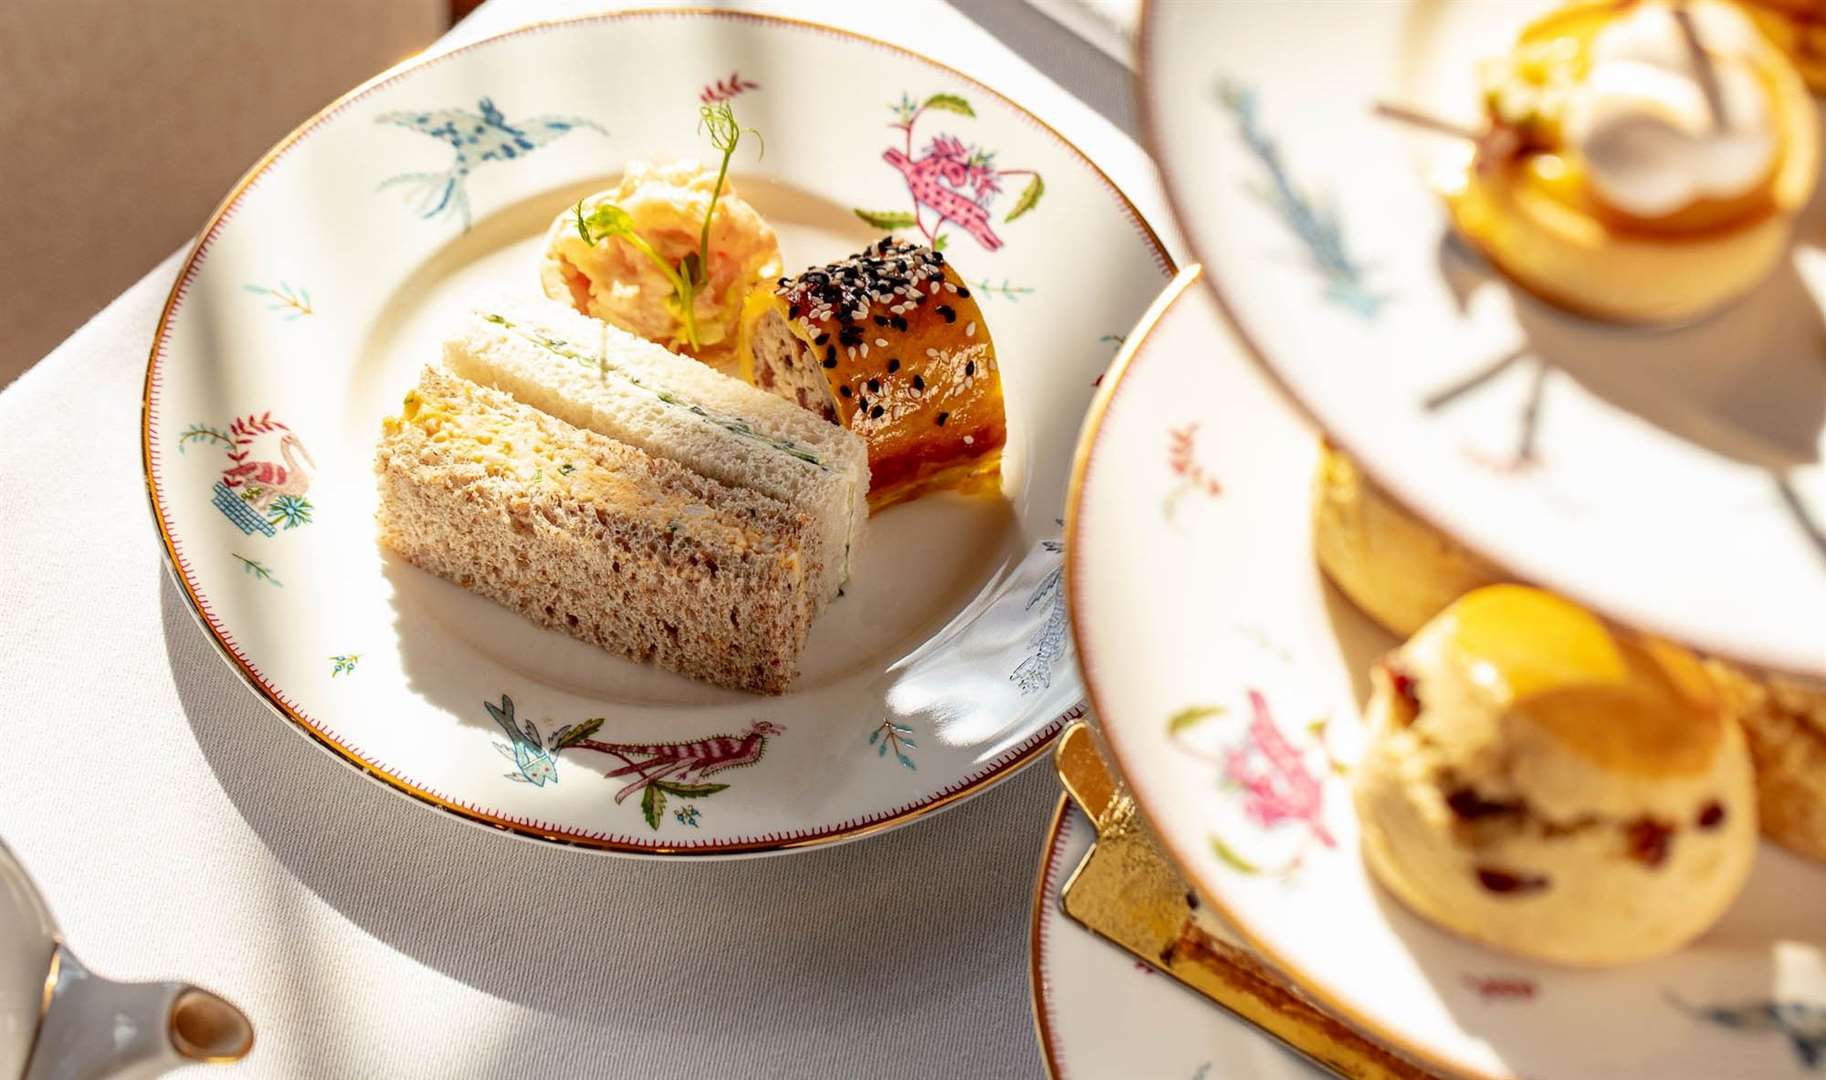 The afternoon tea includes sandwiches, pastries and scones. Picture: Aspinall Foundation